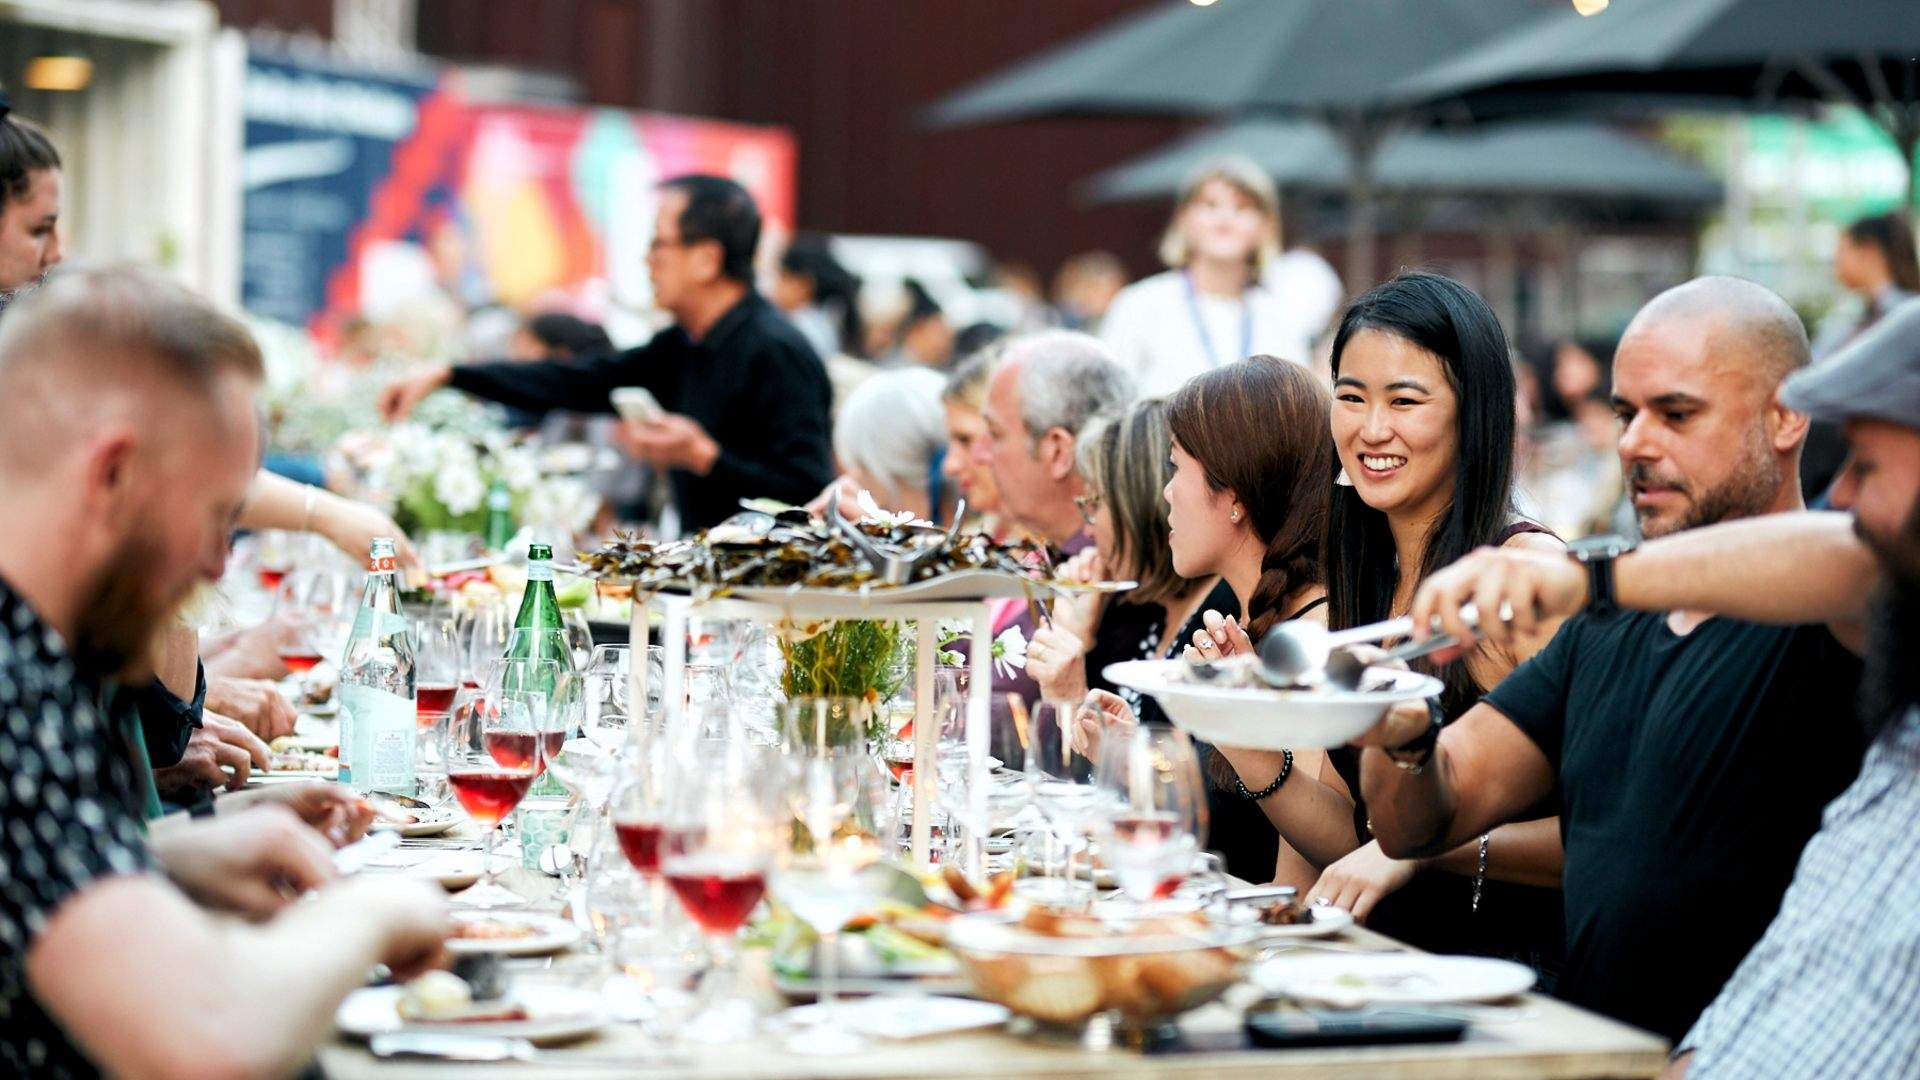 Melbourne Food & Wine Festival Announces Huge 2021 Program with Not One, But Three Festivals